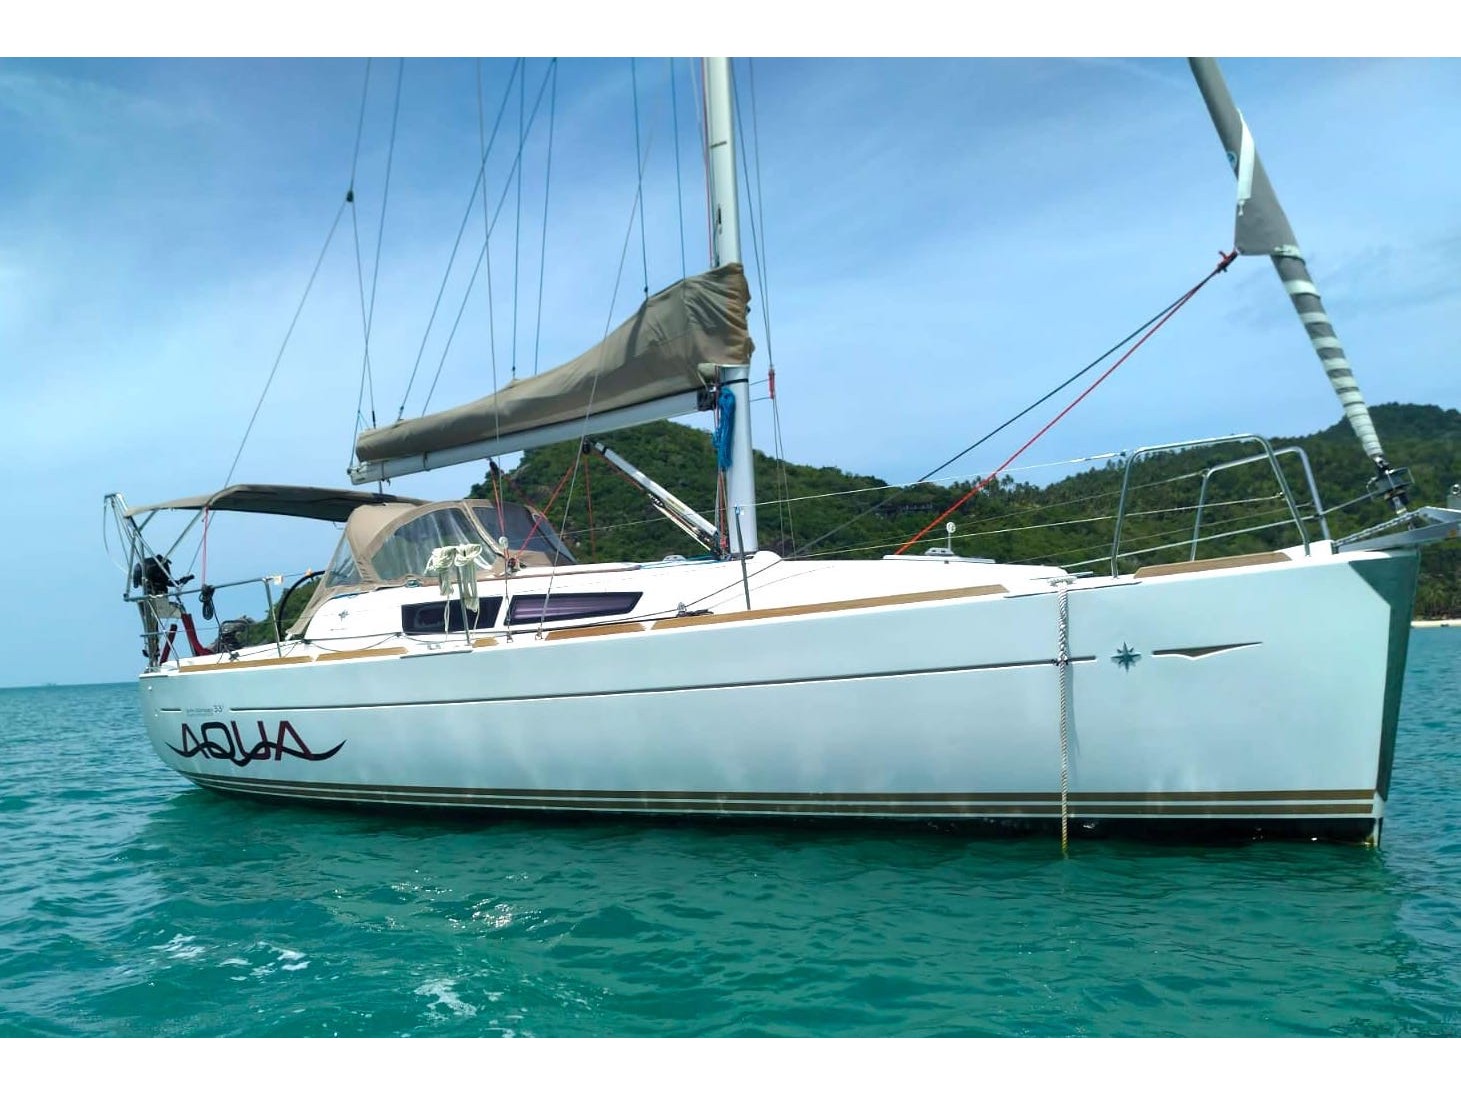 Sun Odyssey 33i - Yacht Charter Koh Chang & Boat hire in Thailand Koh Chang Ao Salak Phet 2